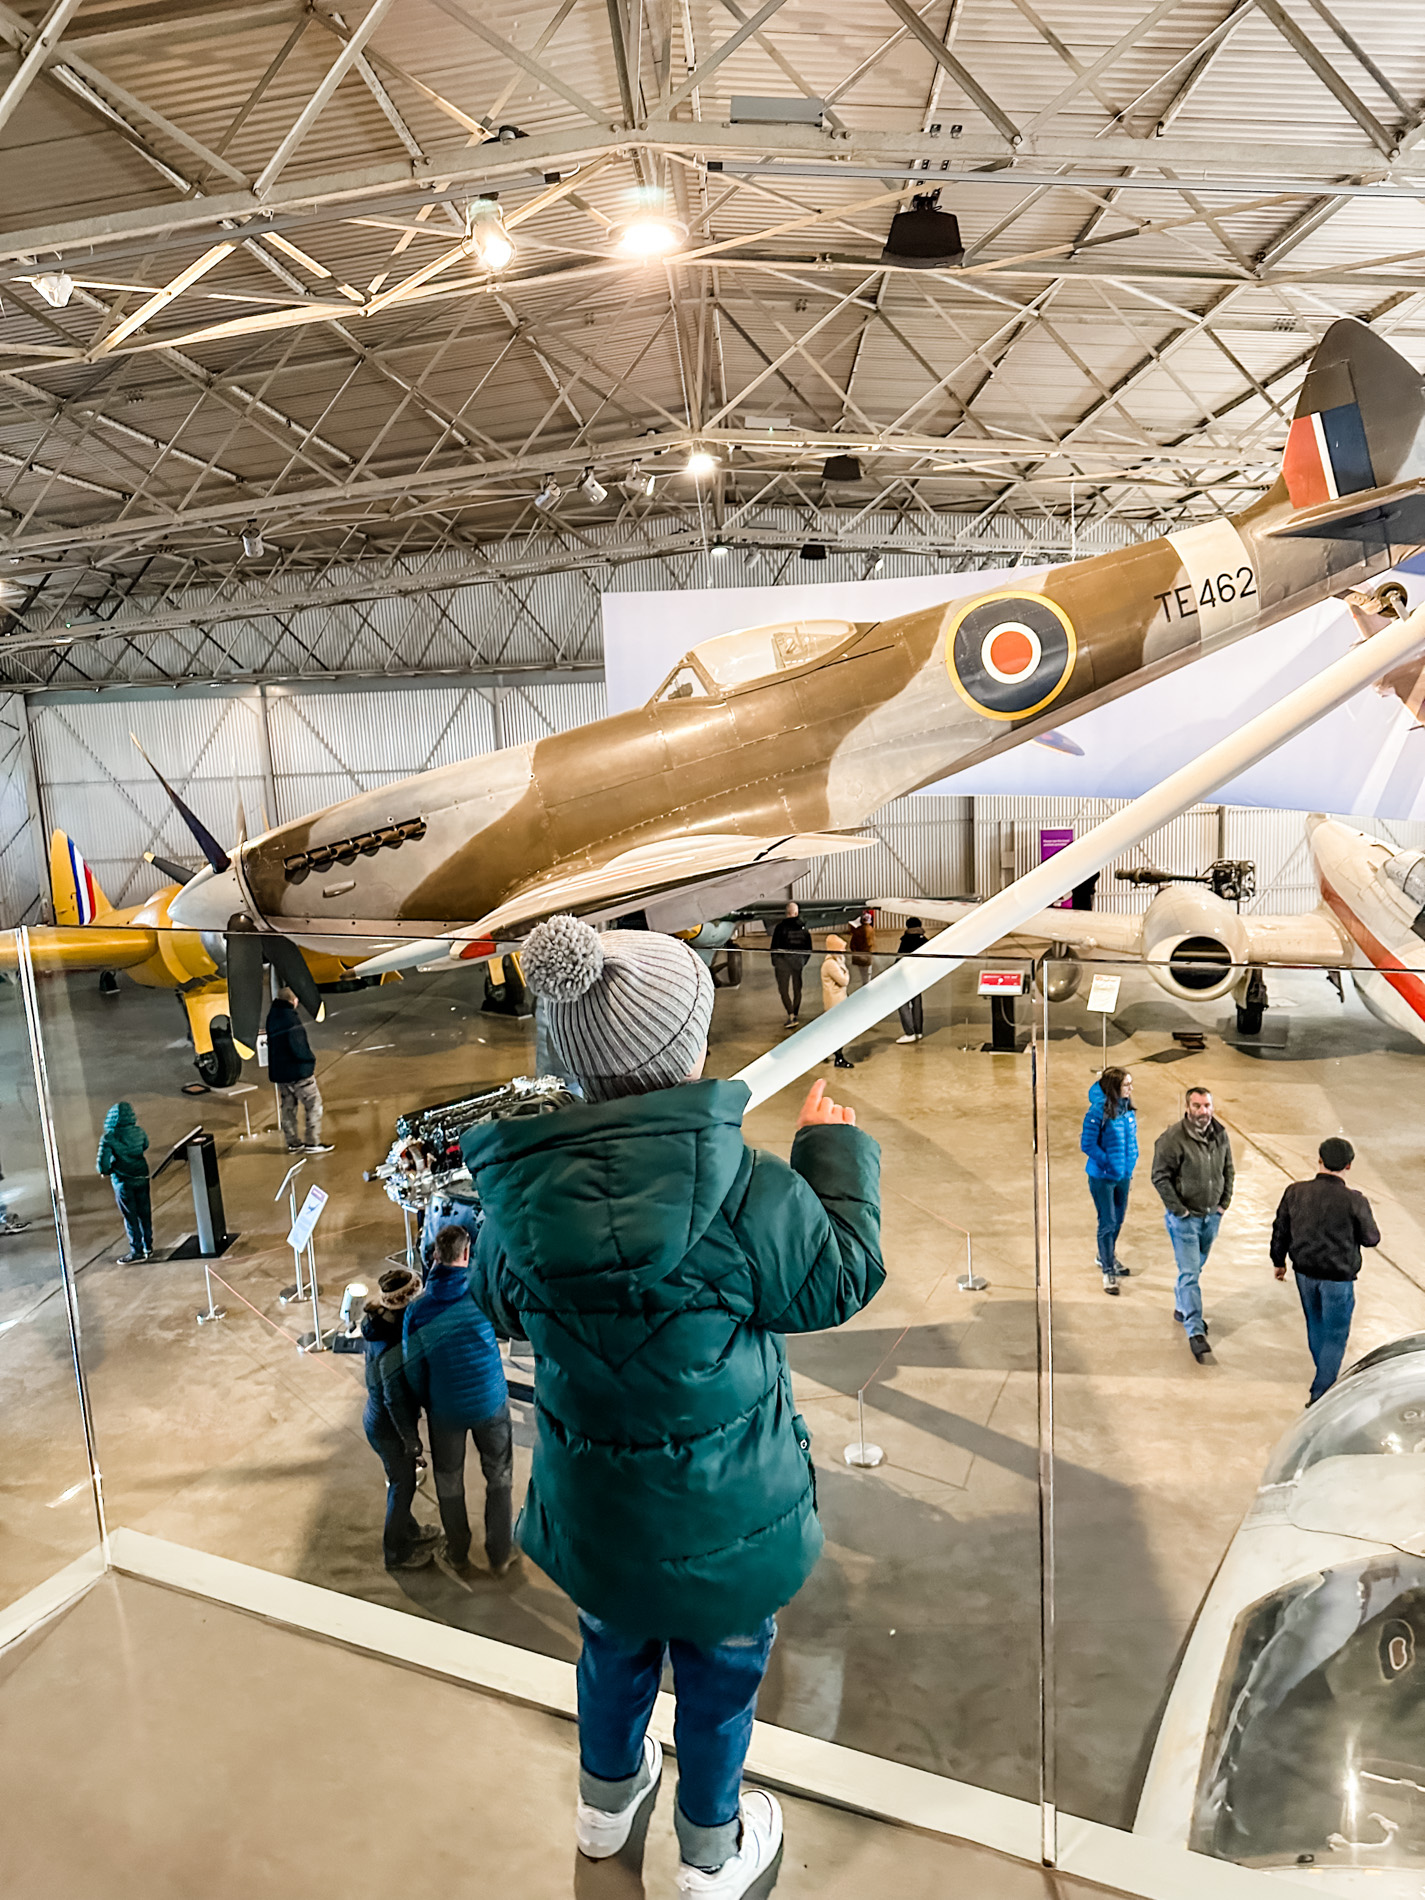 The Museum of Flight at East Fortune, Fife